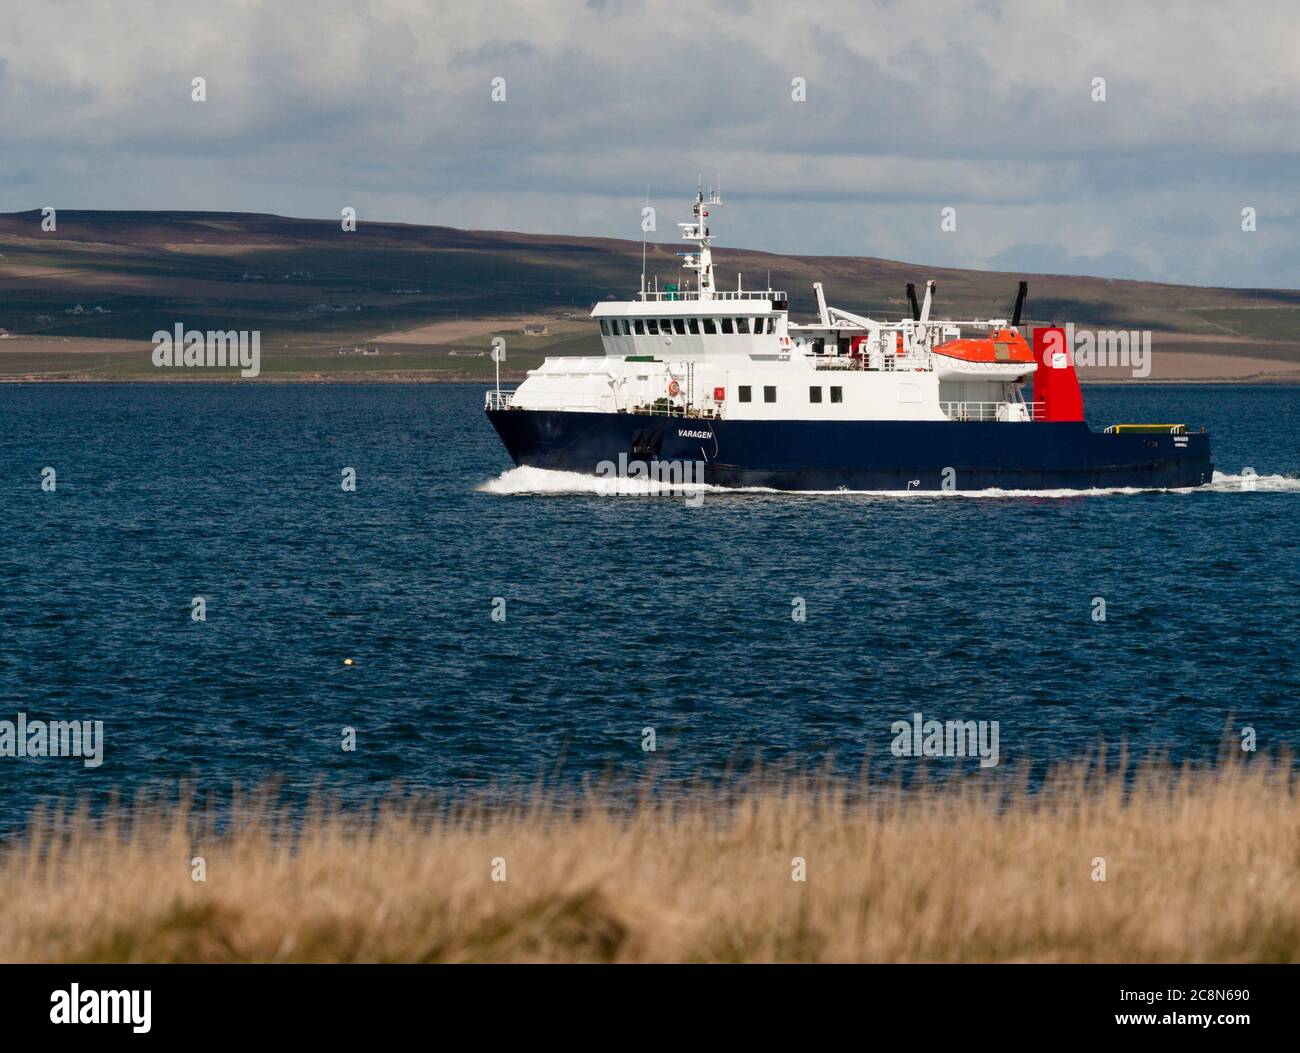 Inter-island ferry Varagen, operated by Orkney Ferries, entering Kirkwall Bay, Orkney, Scotland Stock Photo